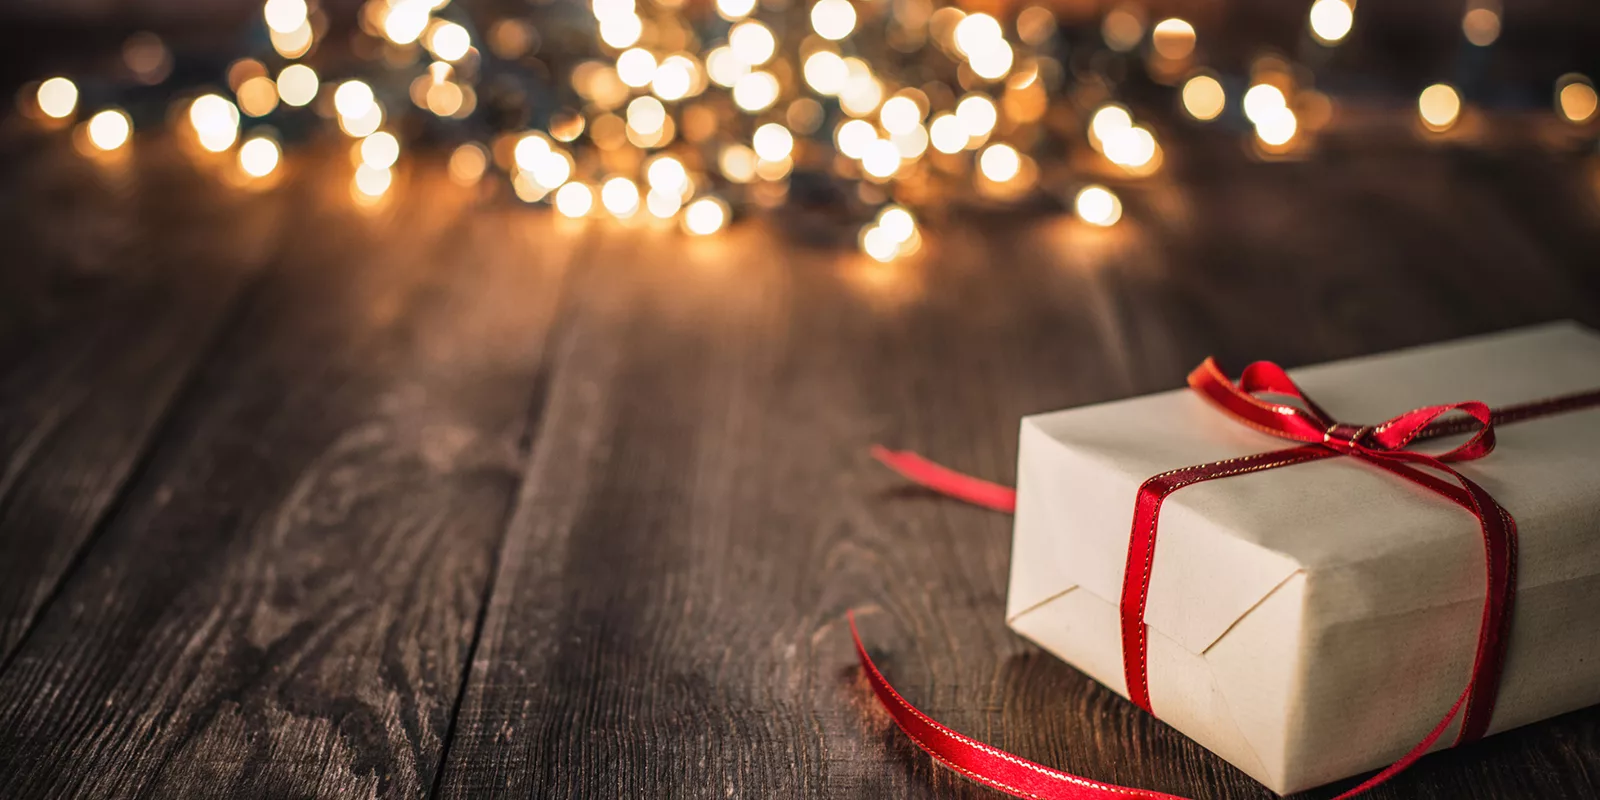 A wrapped gift is set on a wooden floor. String lights twinkle in soft focus in the background.